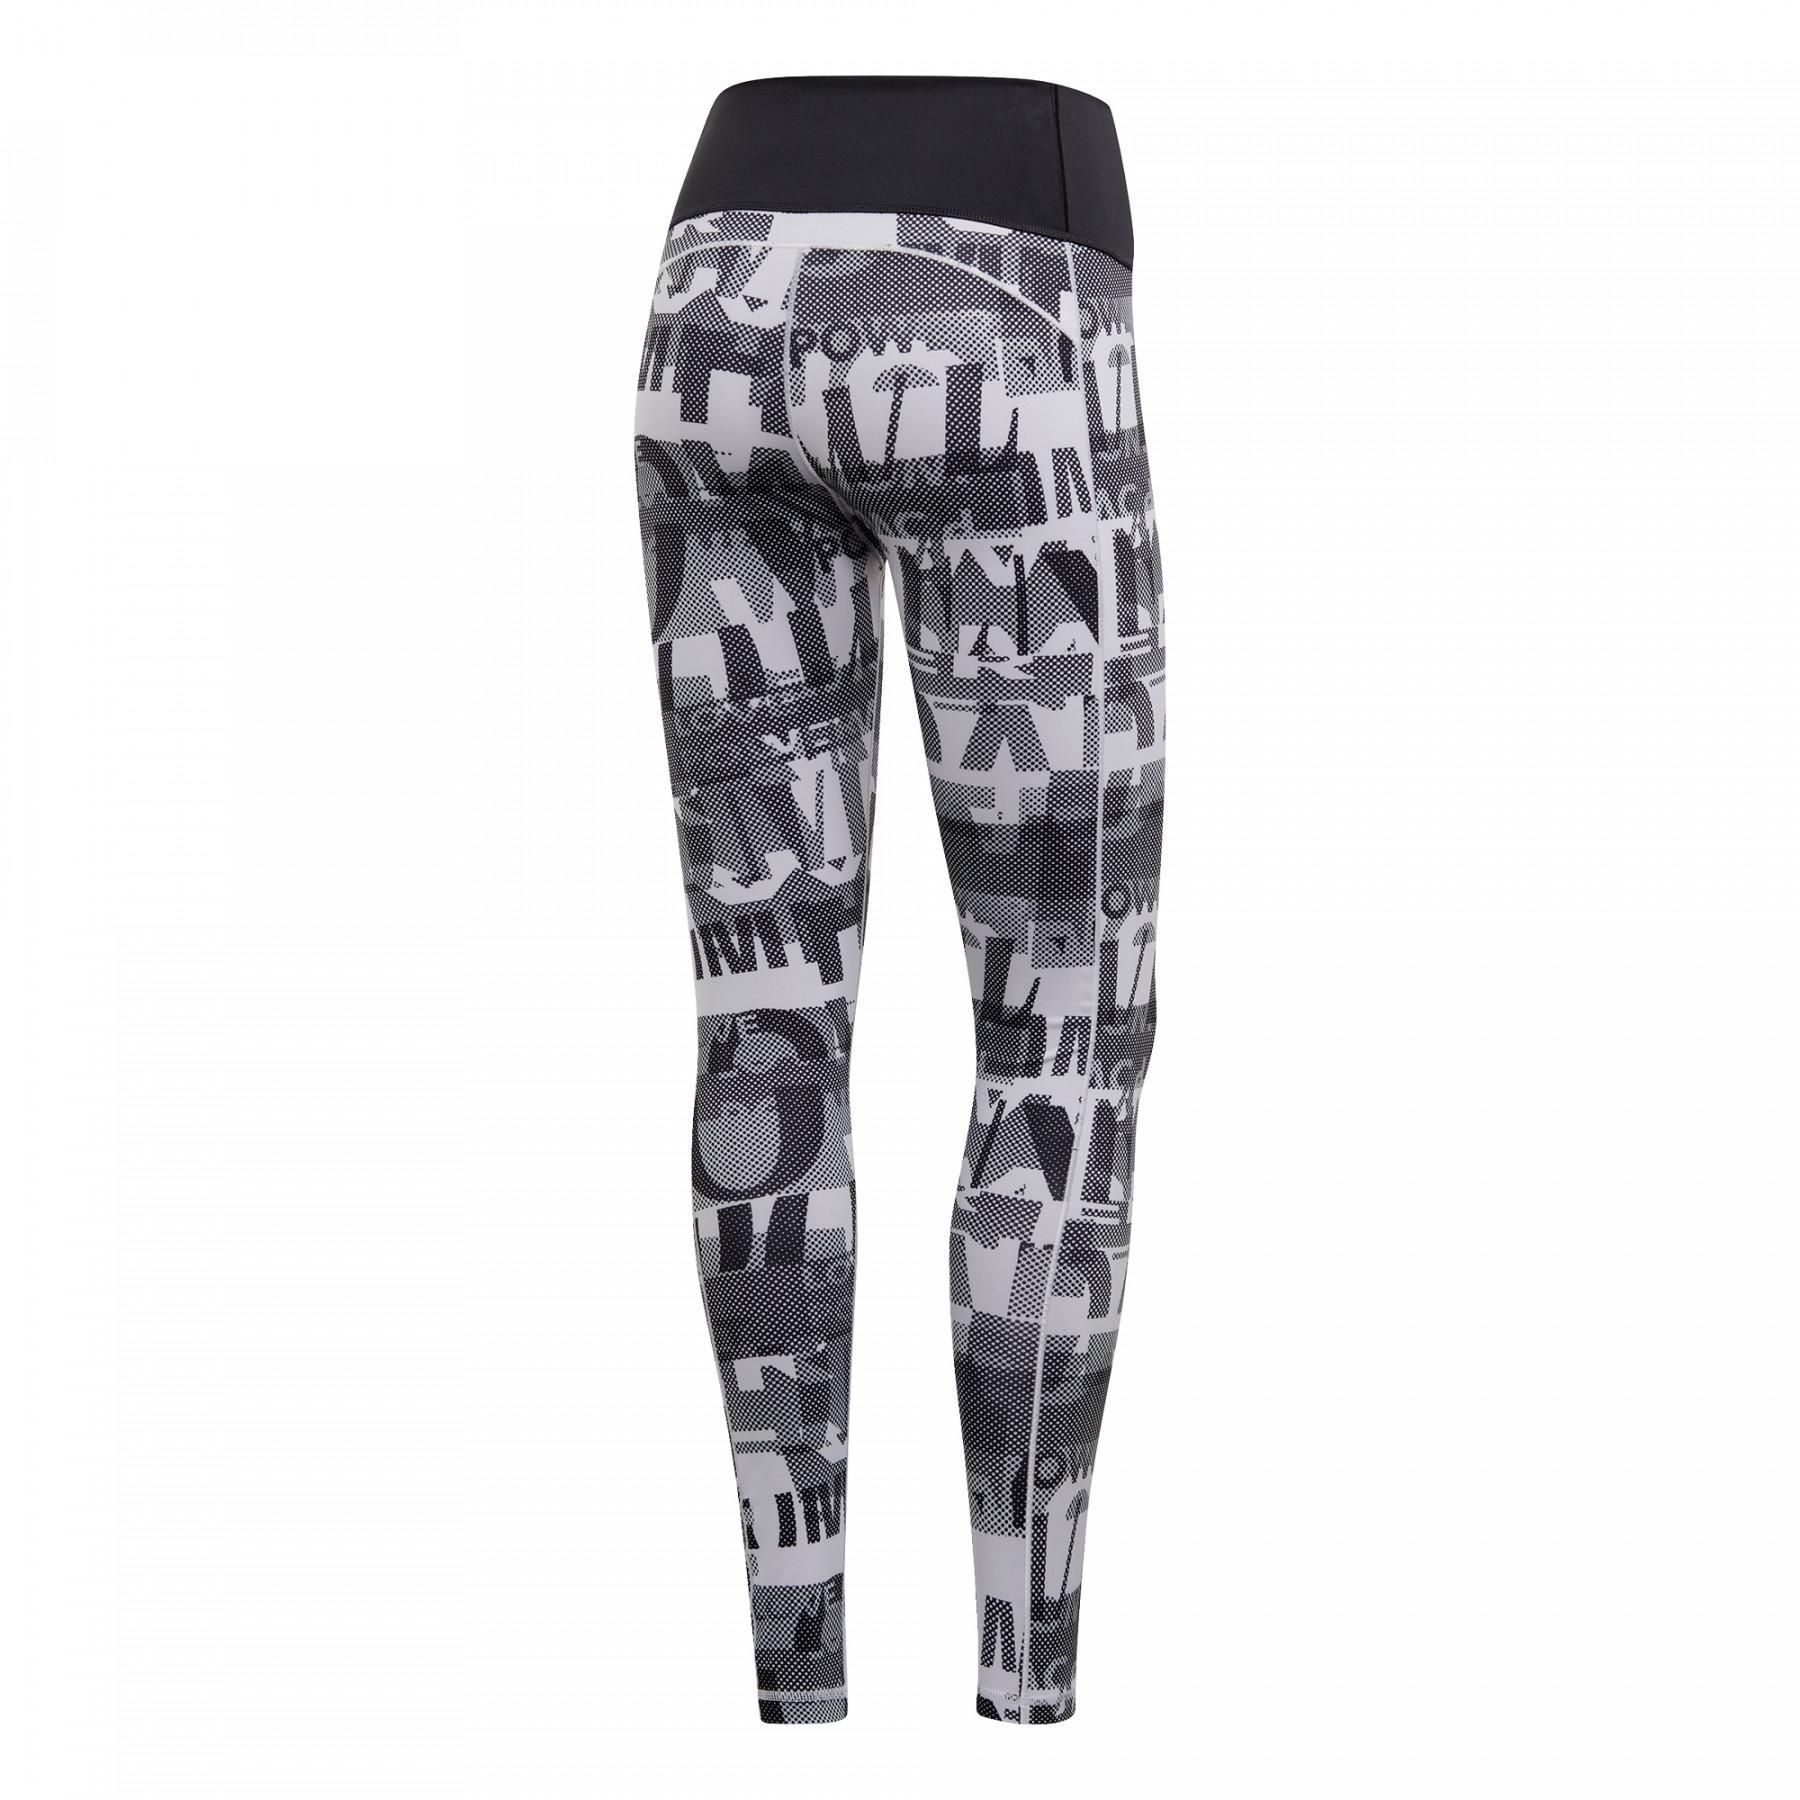 Women's tights adidas Believe This Iterations